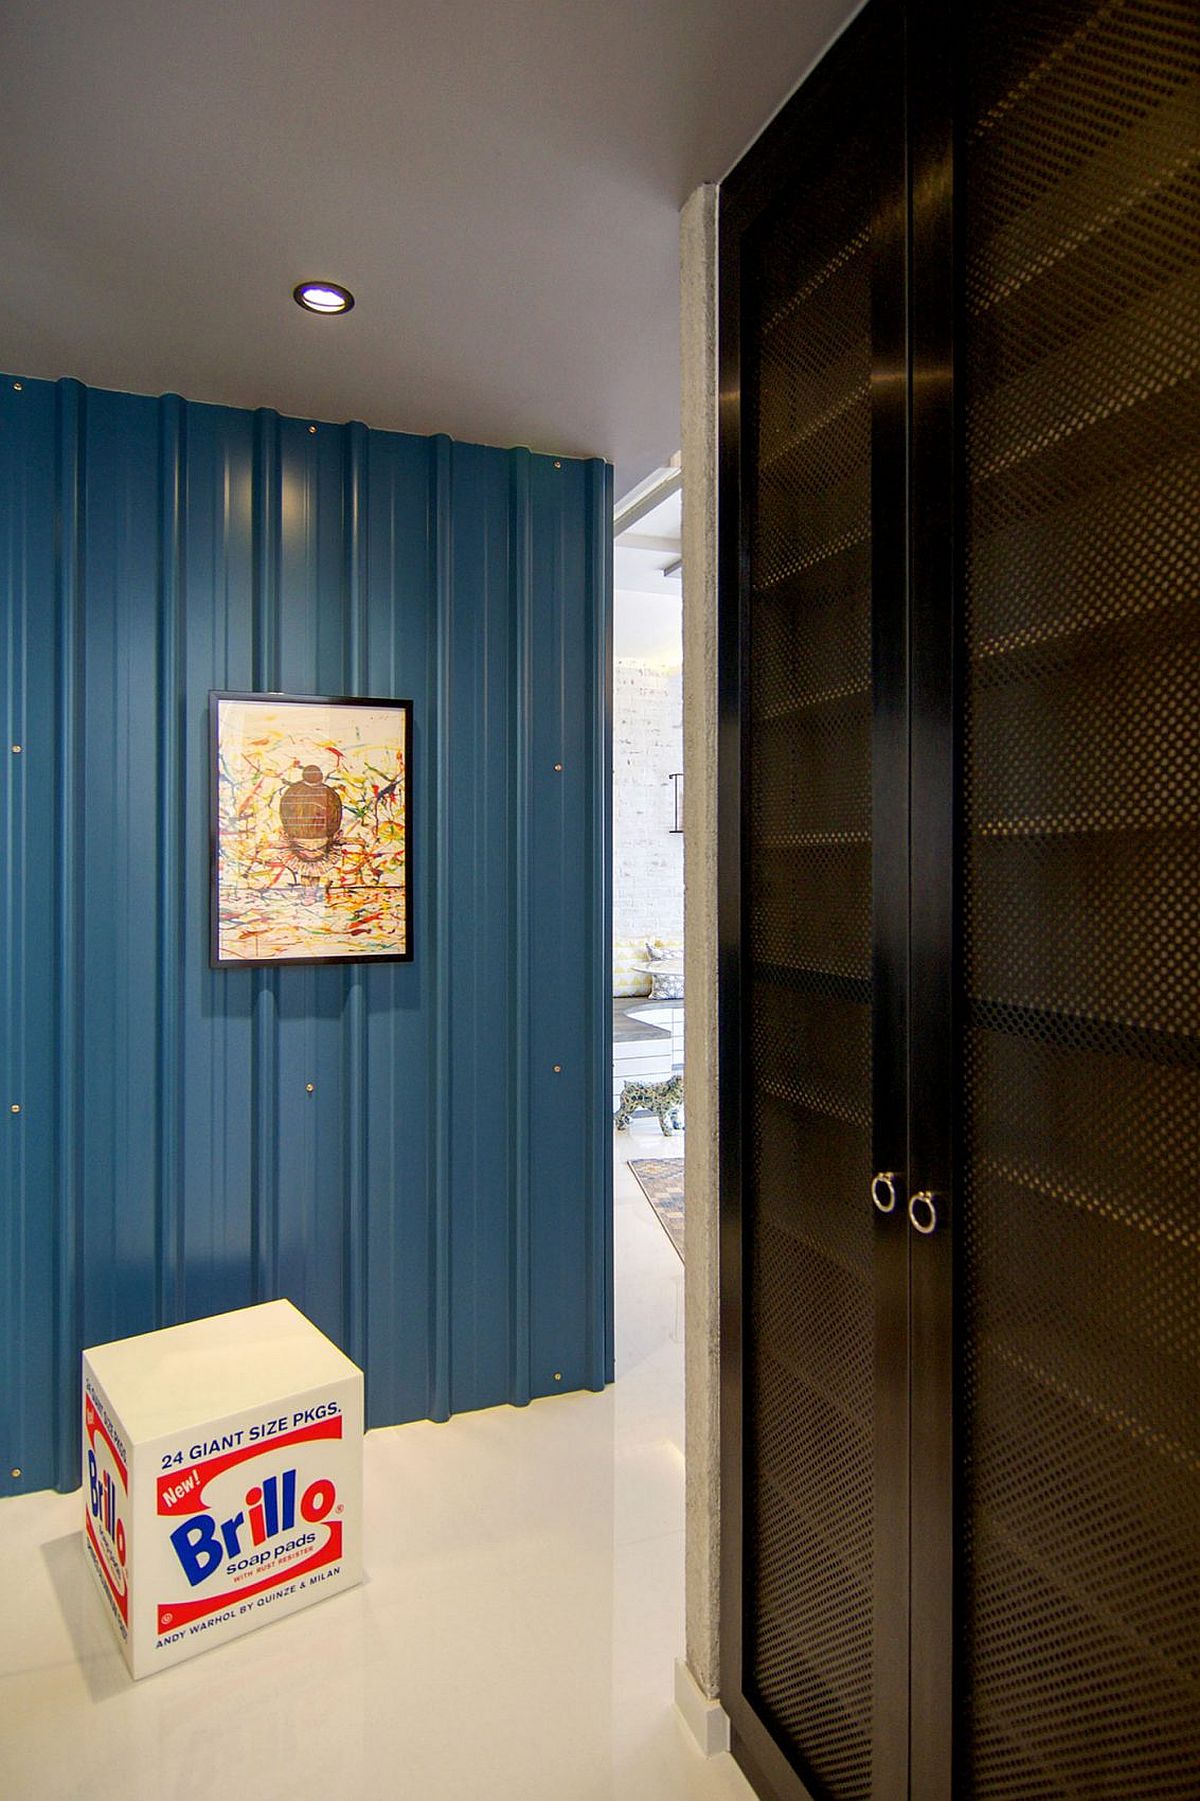 Blue metallic claddin on the wall welcomes you to the colorful home in Singapore